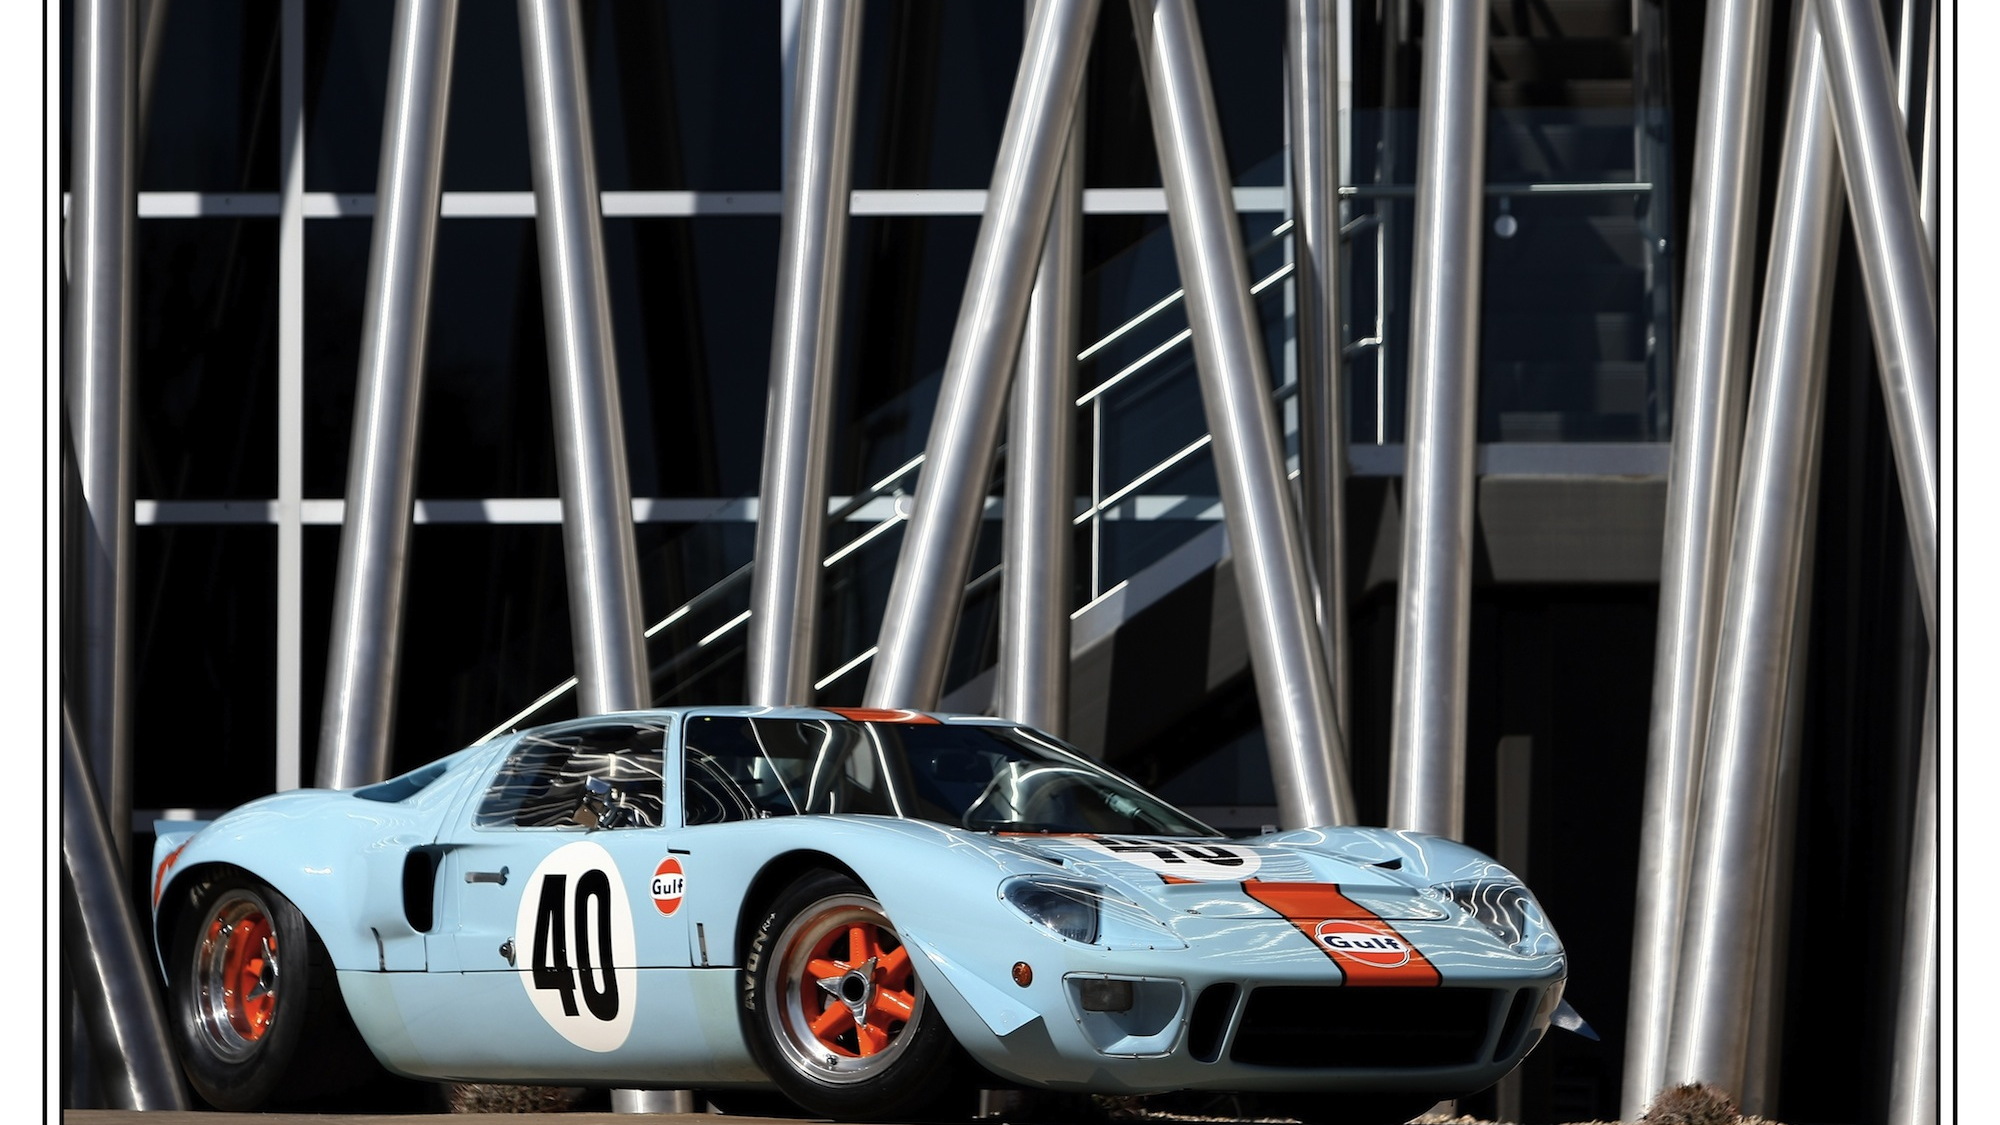 1967 Ford GT40 Mk1. Photo courtesy of RM Auctions.